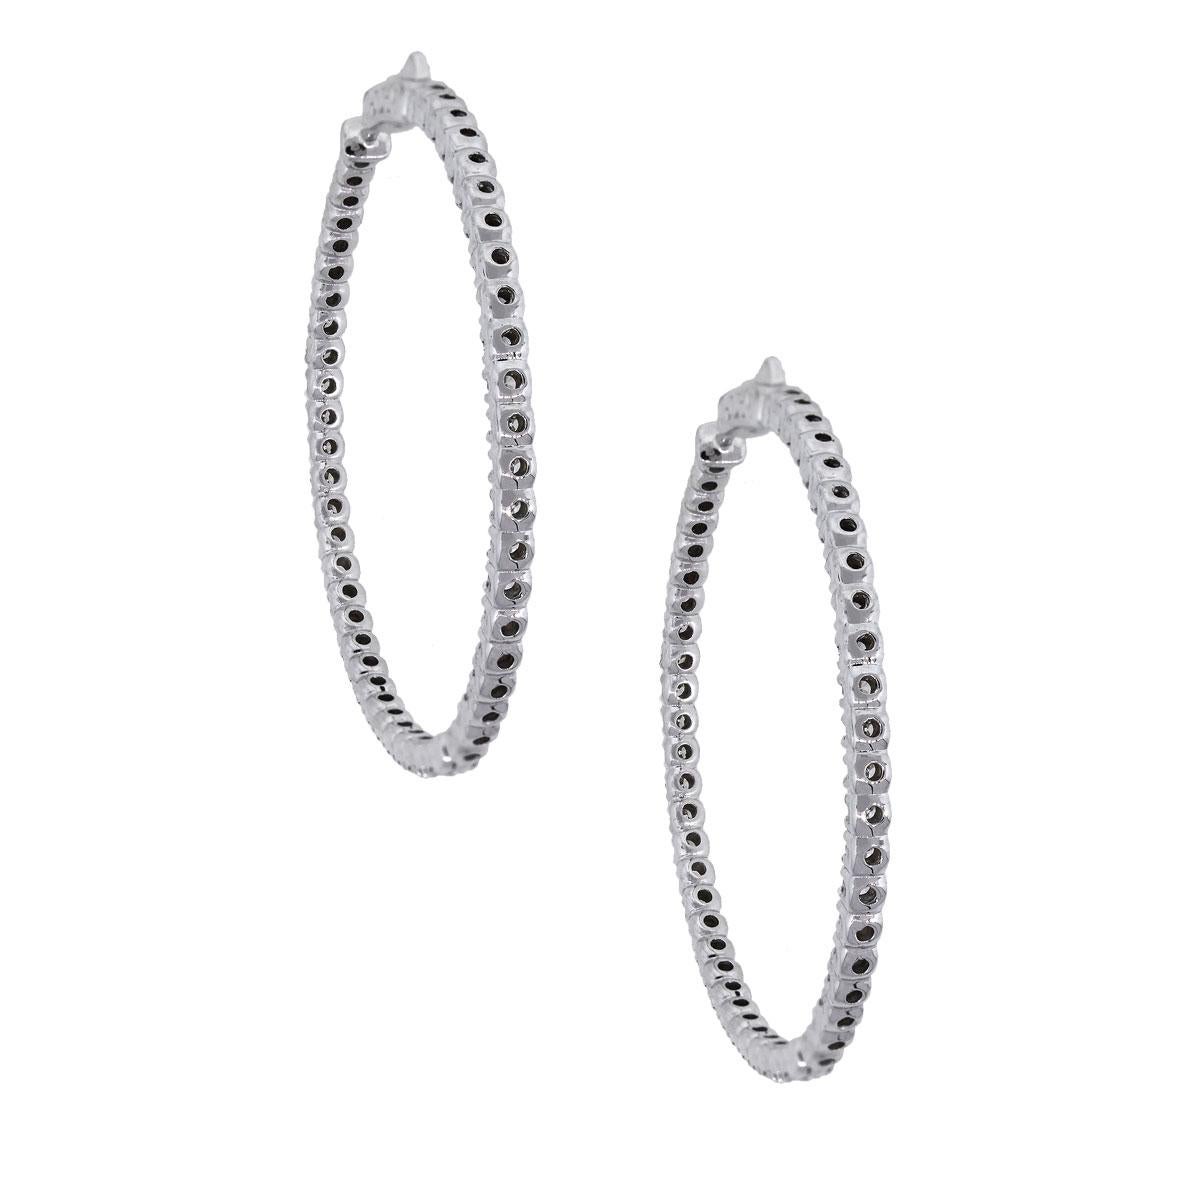 Material: 14k white Gold
Style: Diamond Inside Out Hoops
Diamond Details: Approximately 4.59ctw of round brilliant diamonds. Diamonds are G/H in color and SI in clarity.
Earring Measurements: 2″ x 0.11″ x 2″
Total Weight: 19.7g (12.6dwt)
Earring